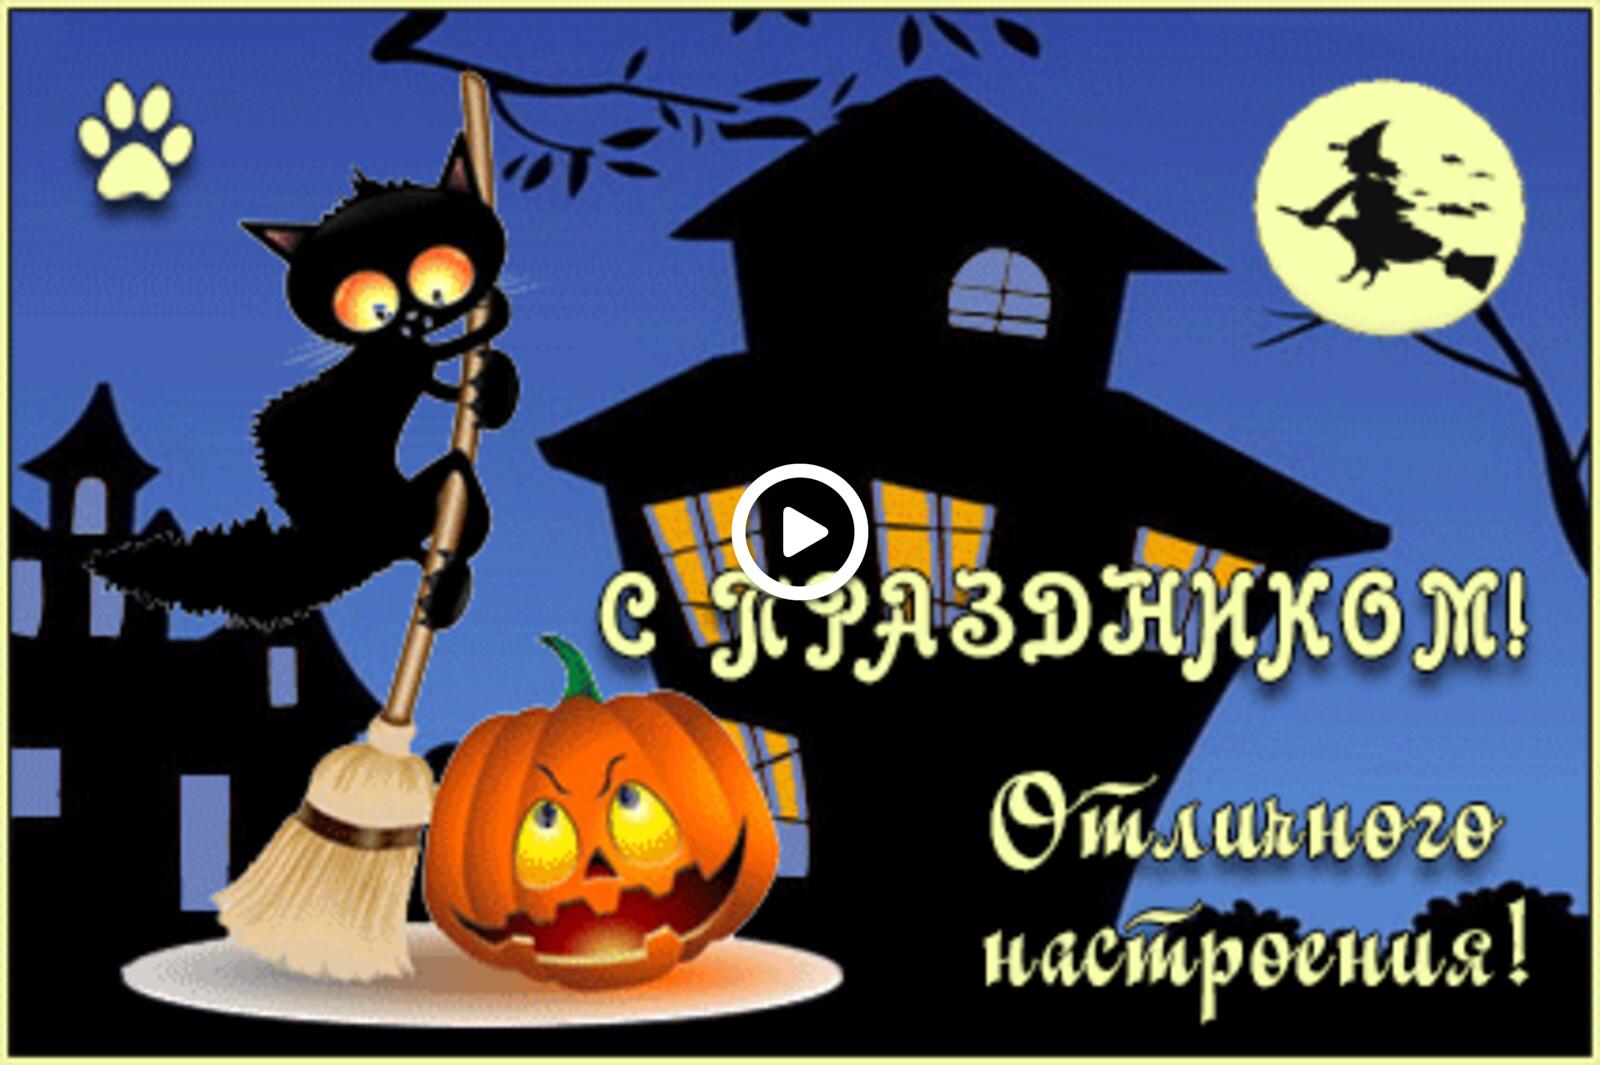 A postcard on the subject of halloween silhouette night for free